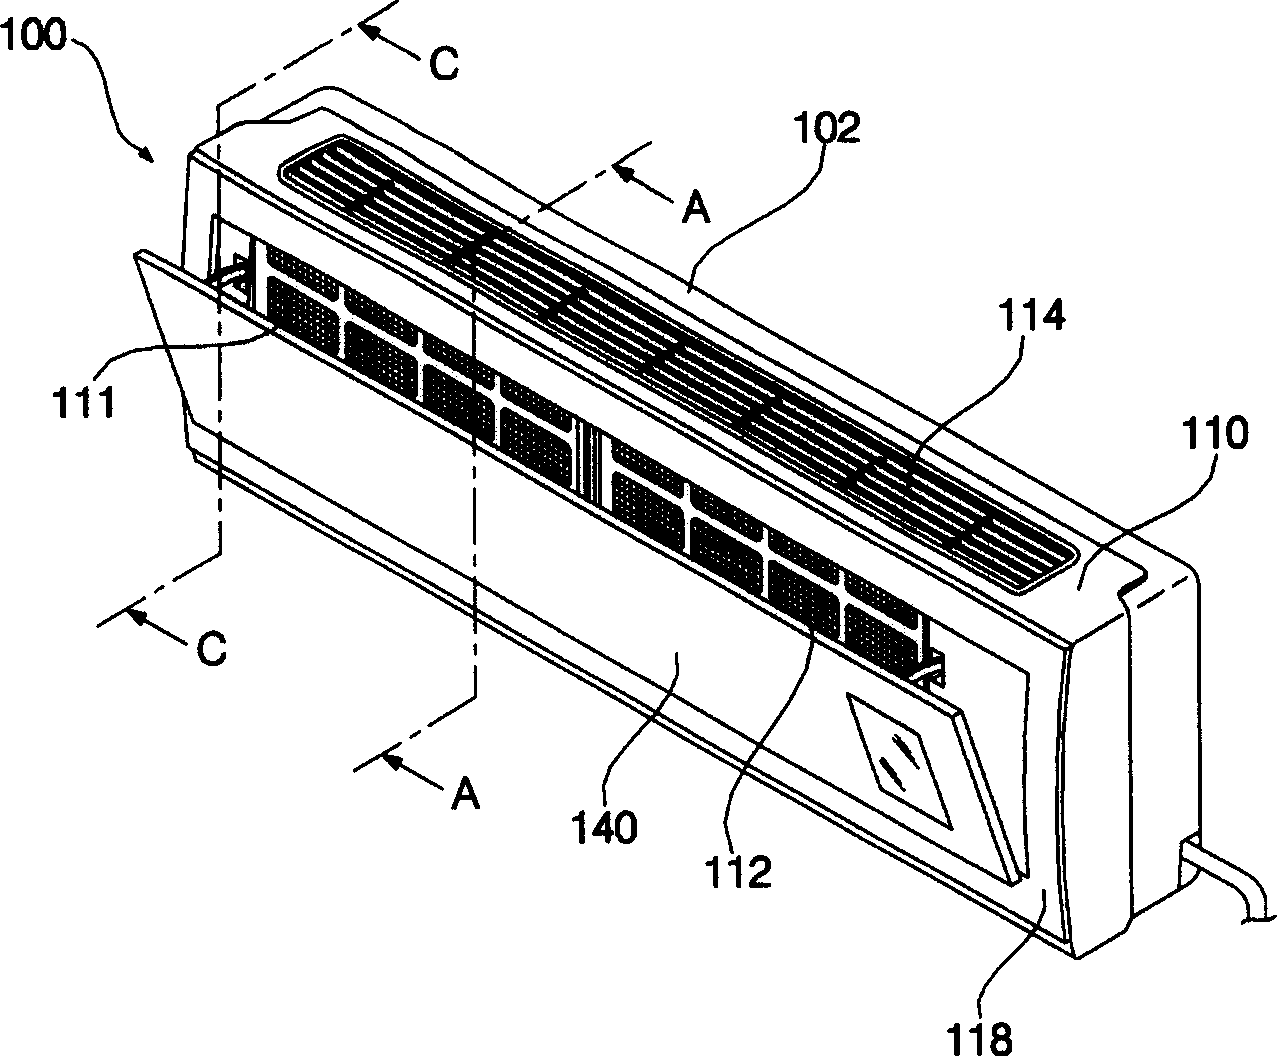 Air conditioner filter device